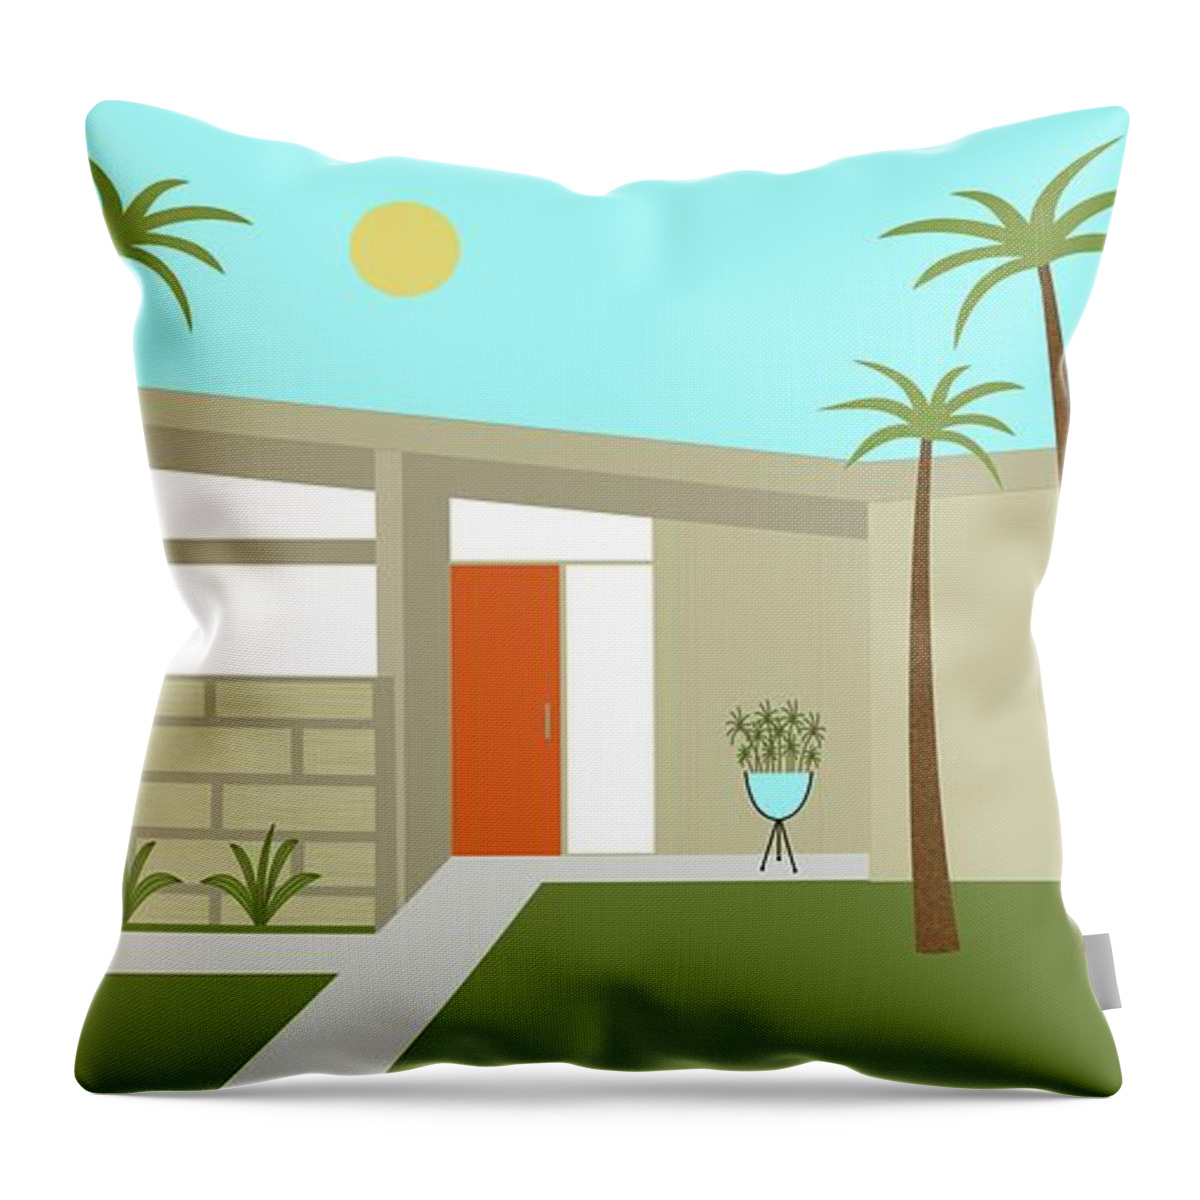 Mcm Throw Pillow featuring the digital art Mid Century Modern House in Tan by Donna Mibus